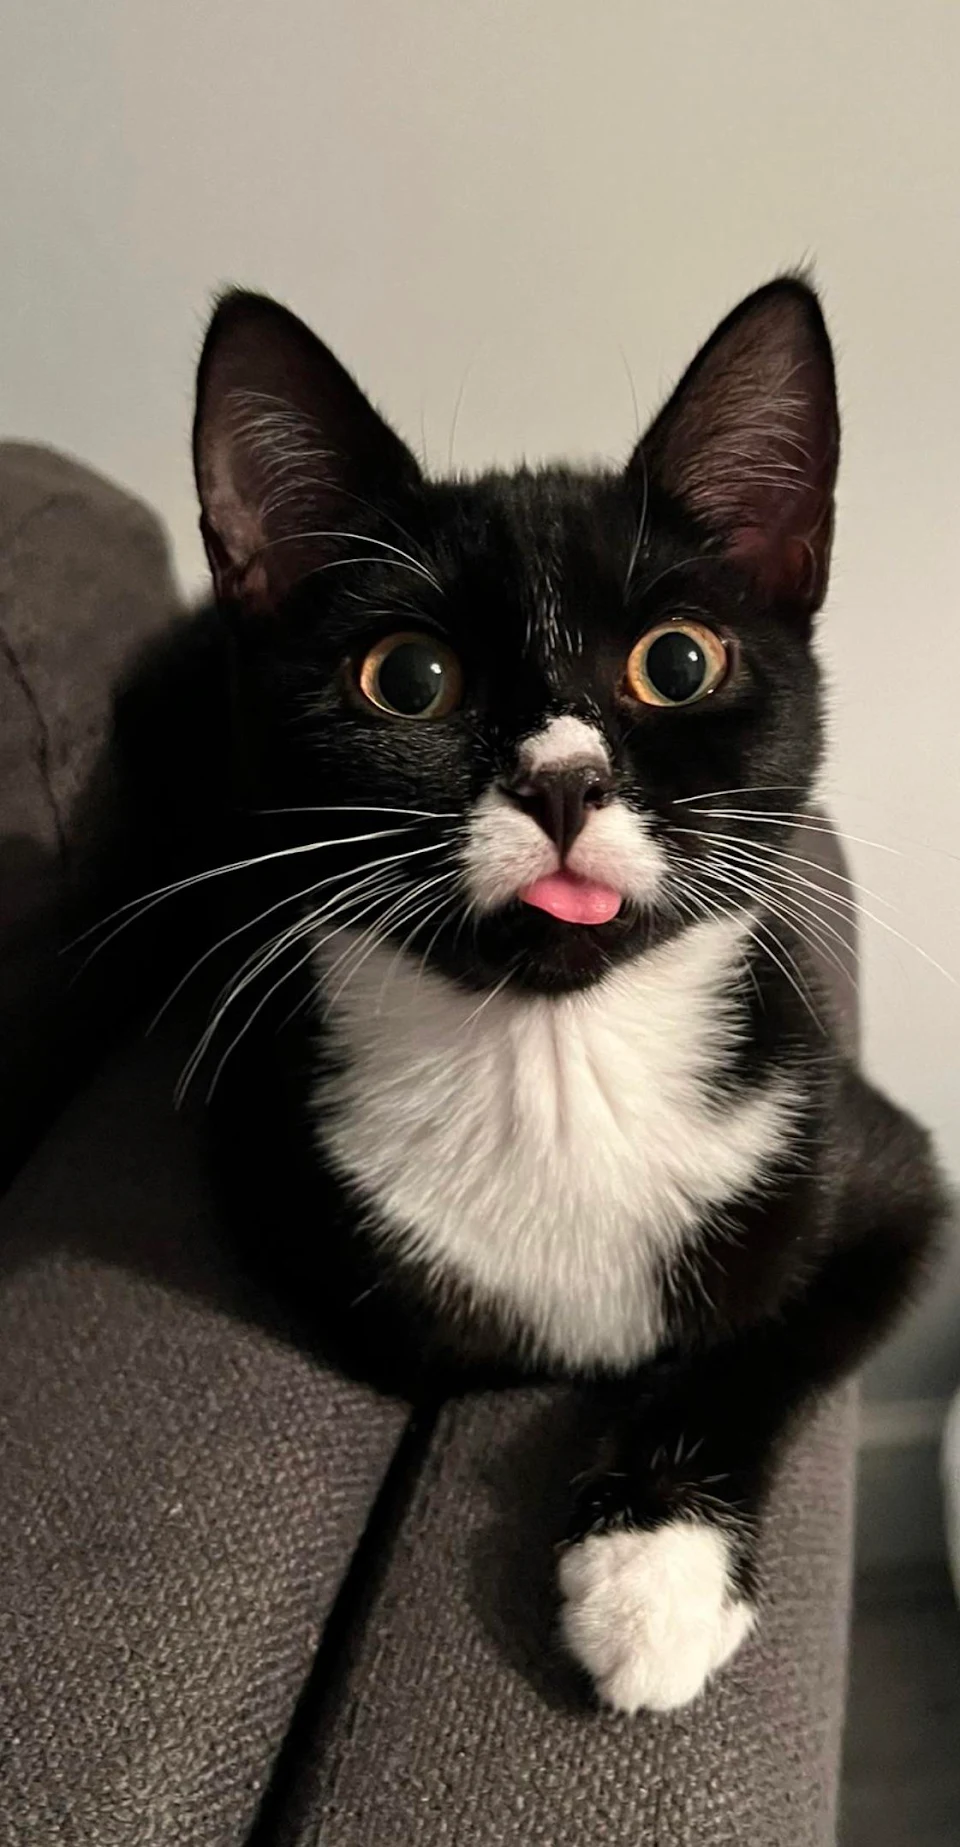 Jessie rarely has a blep face, but good fun when she does